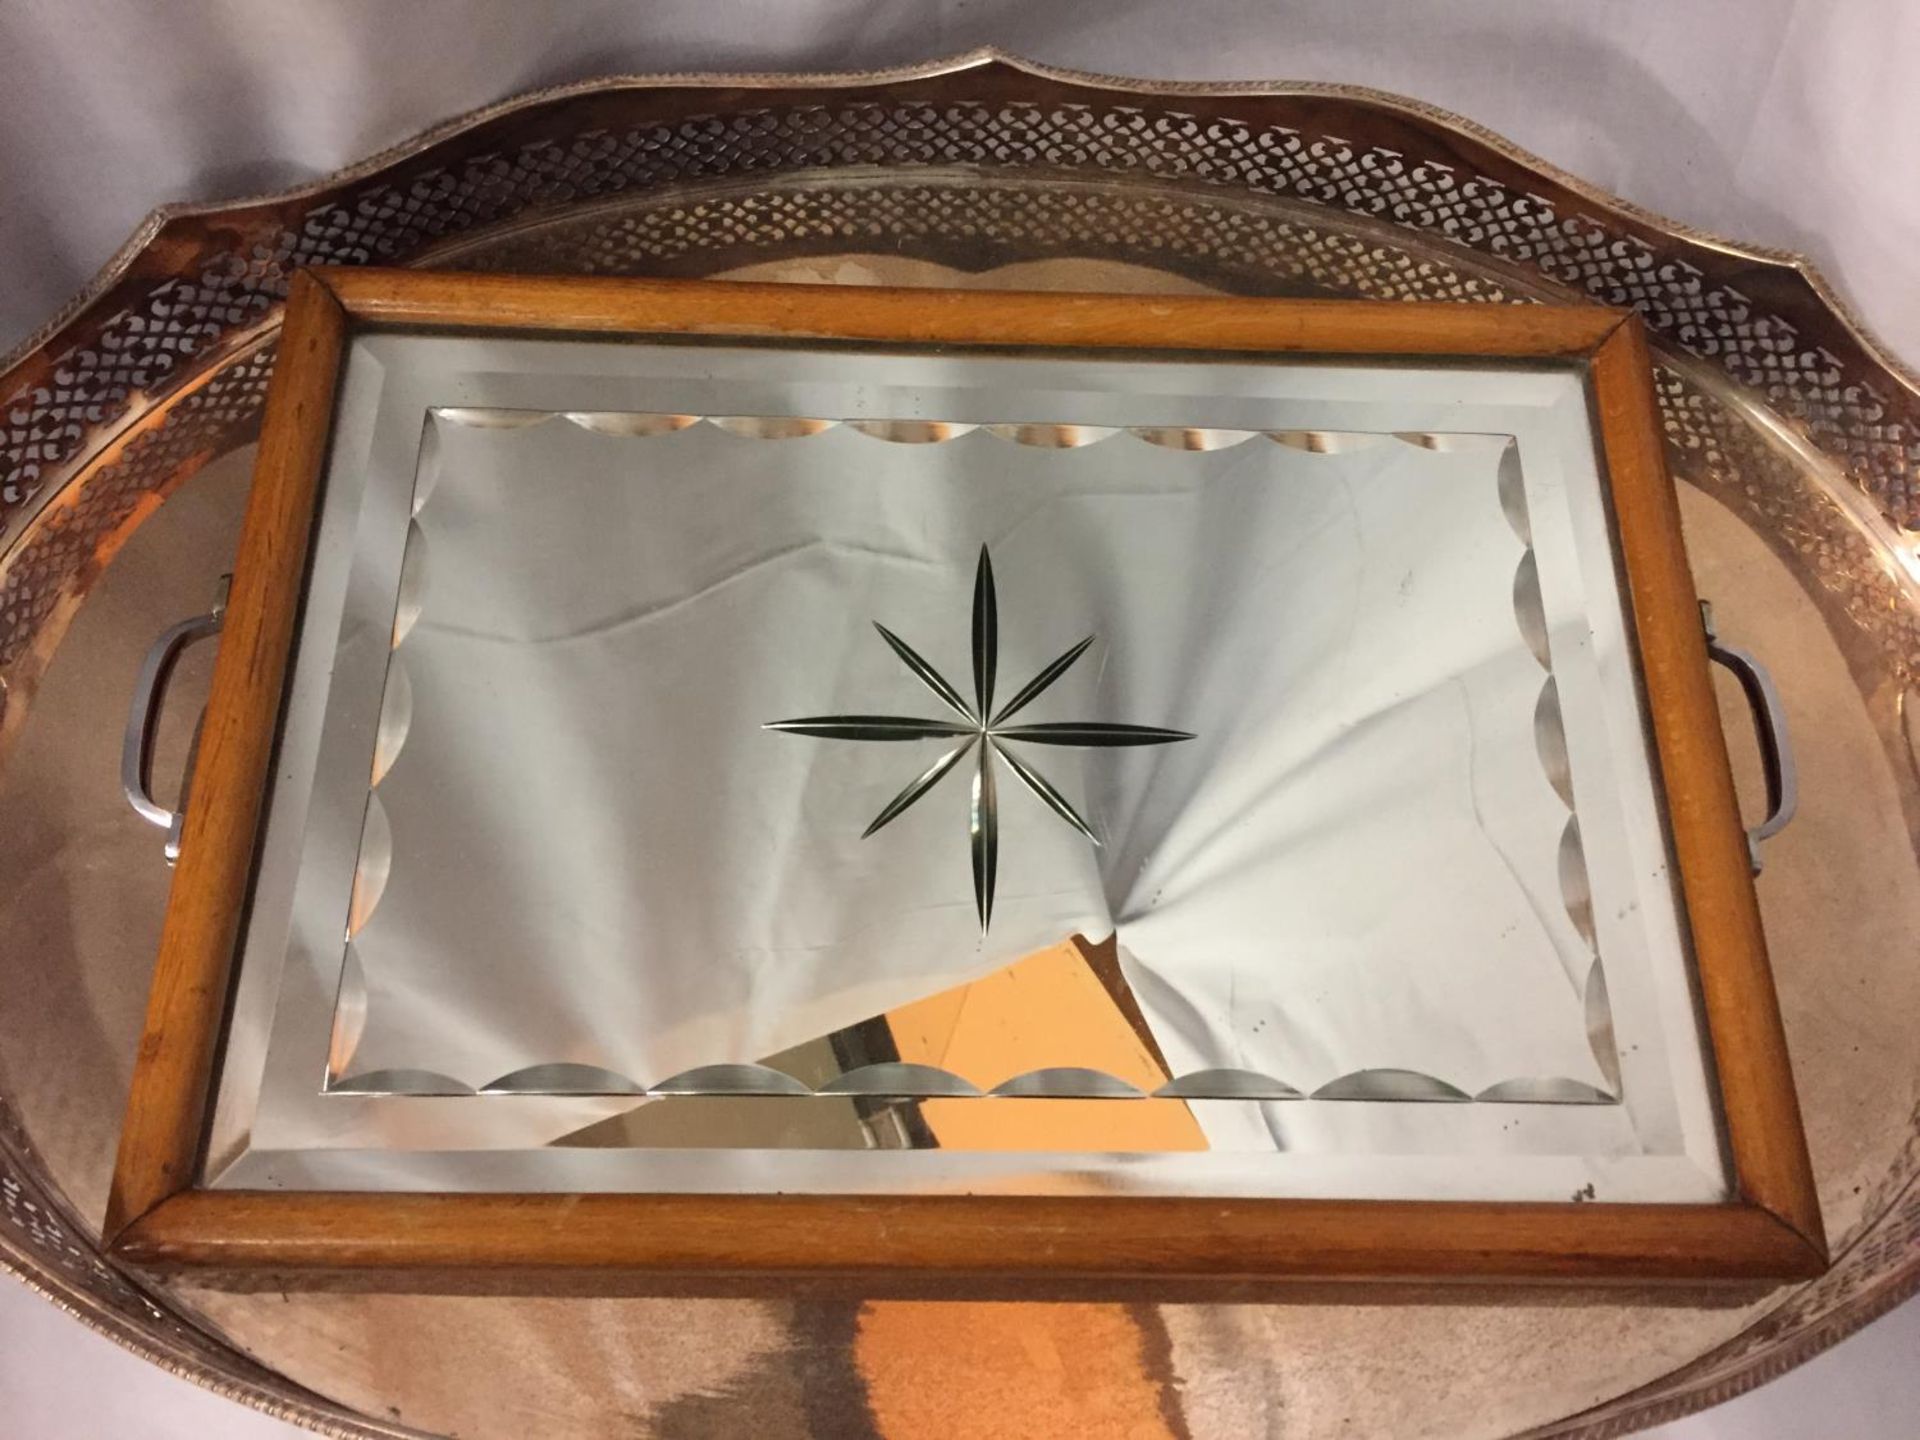 AN EPNS TRAY AND A MIRRORED TRAY - Image 2 of 4